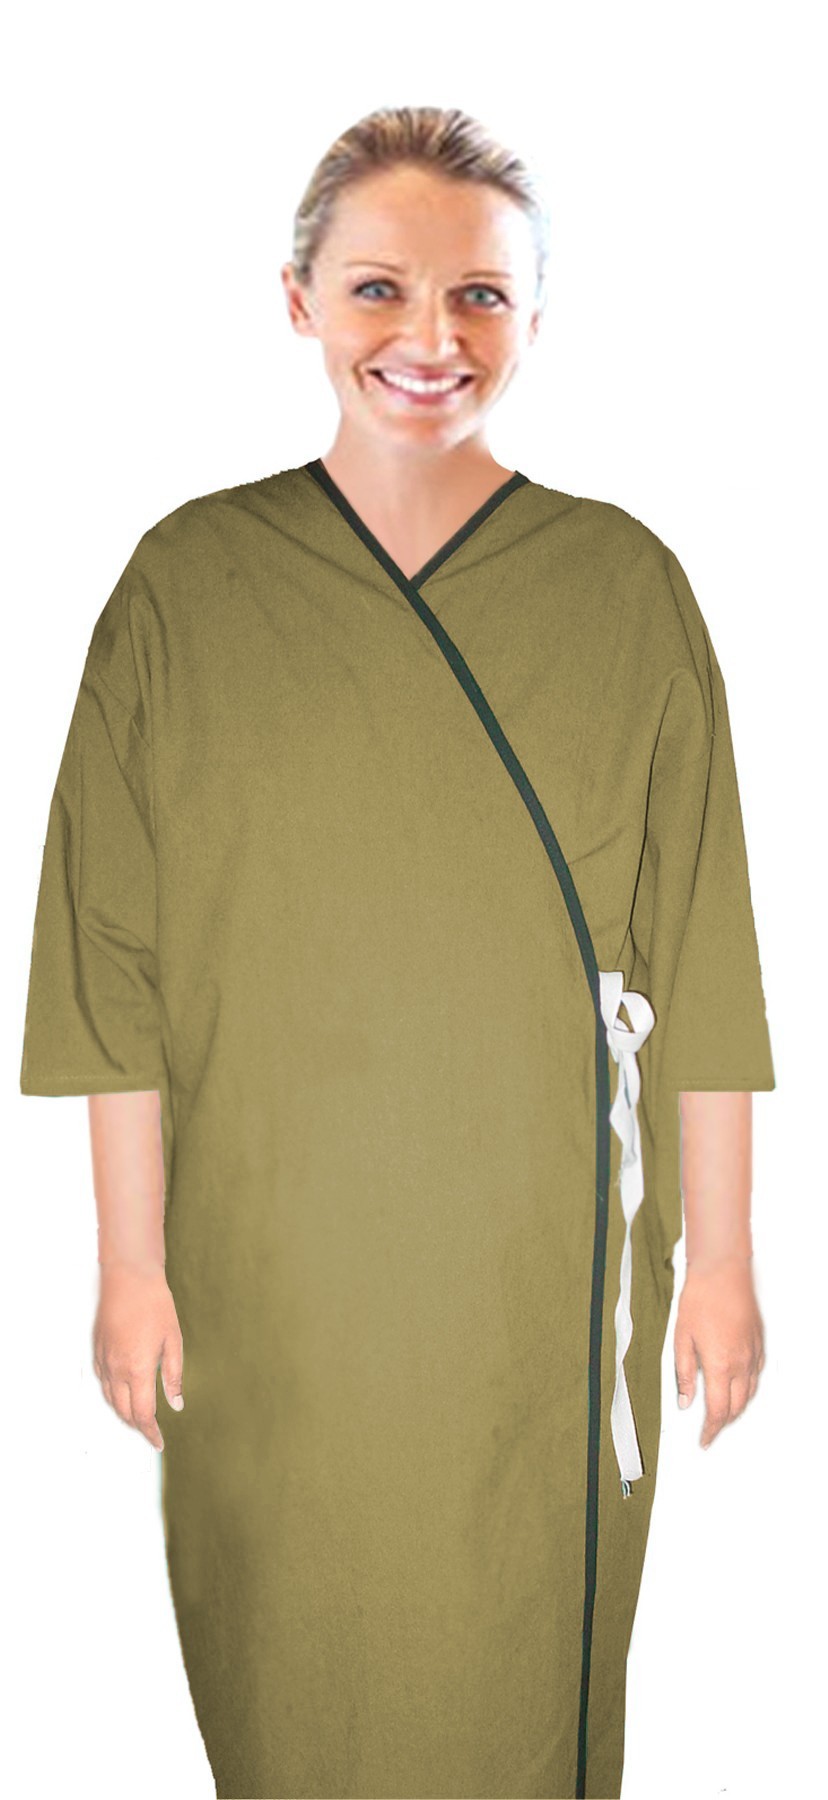 Microfiber patient gown front open half sleeve with matchng piping  tie-able, Sizes XS-9X